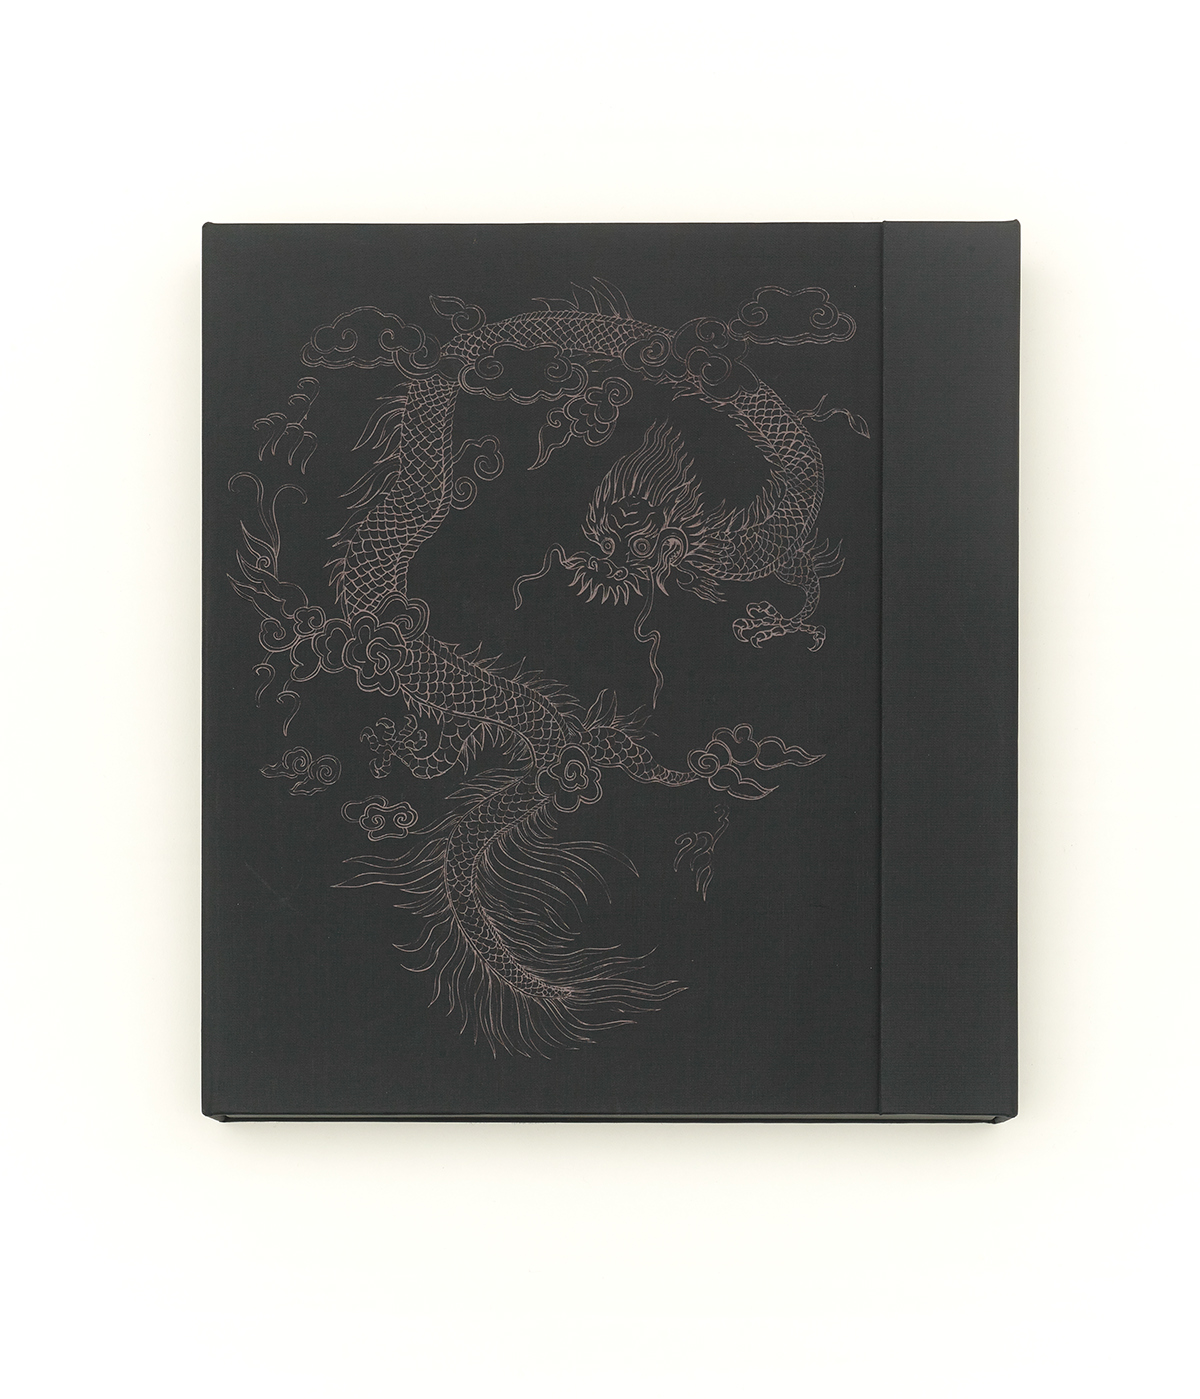 china through the looking glass book design